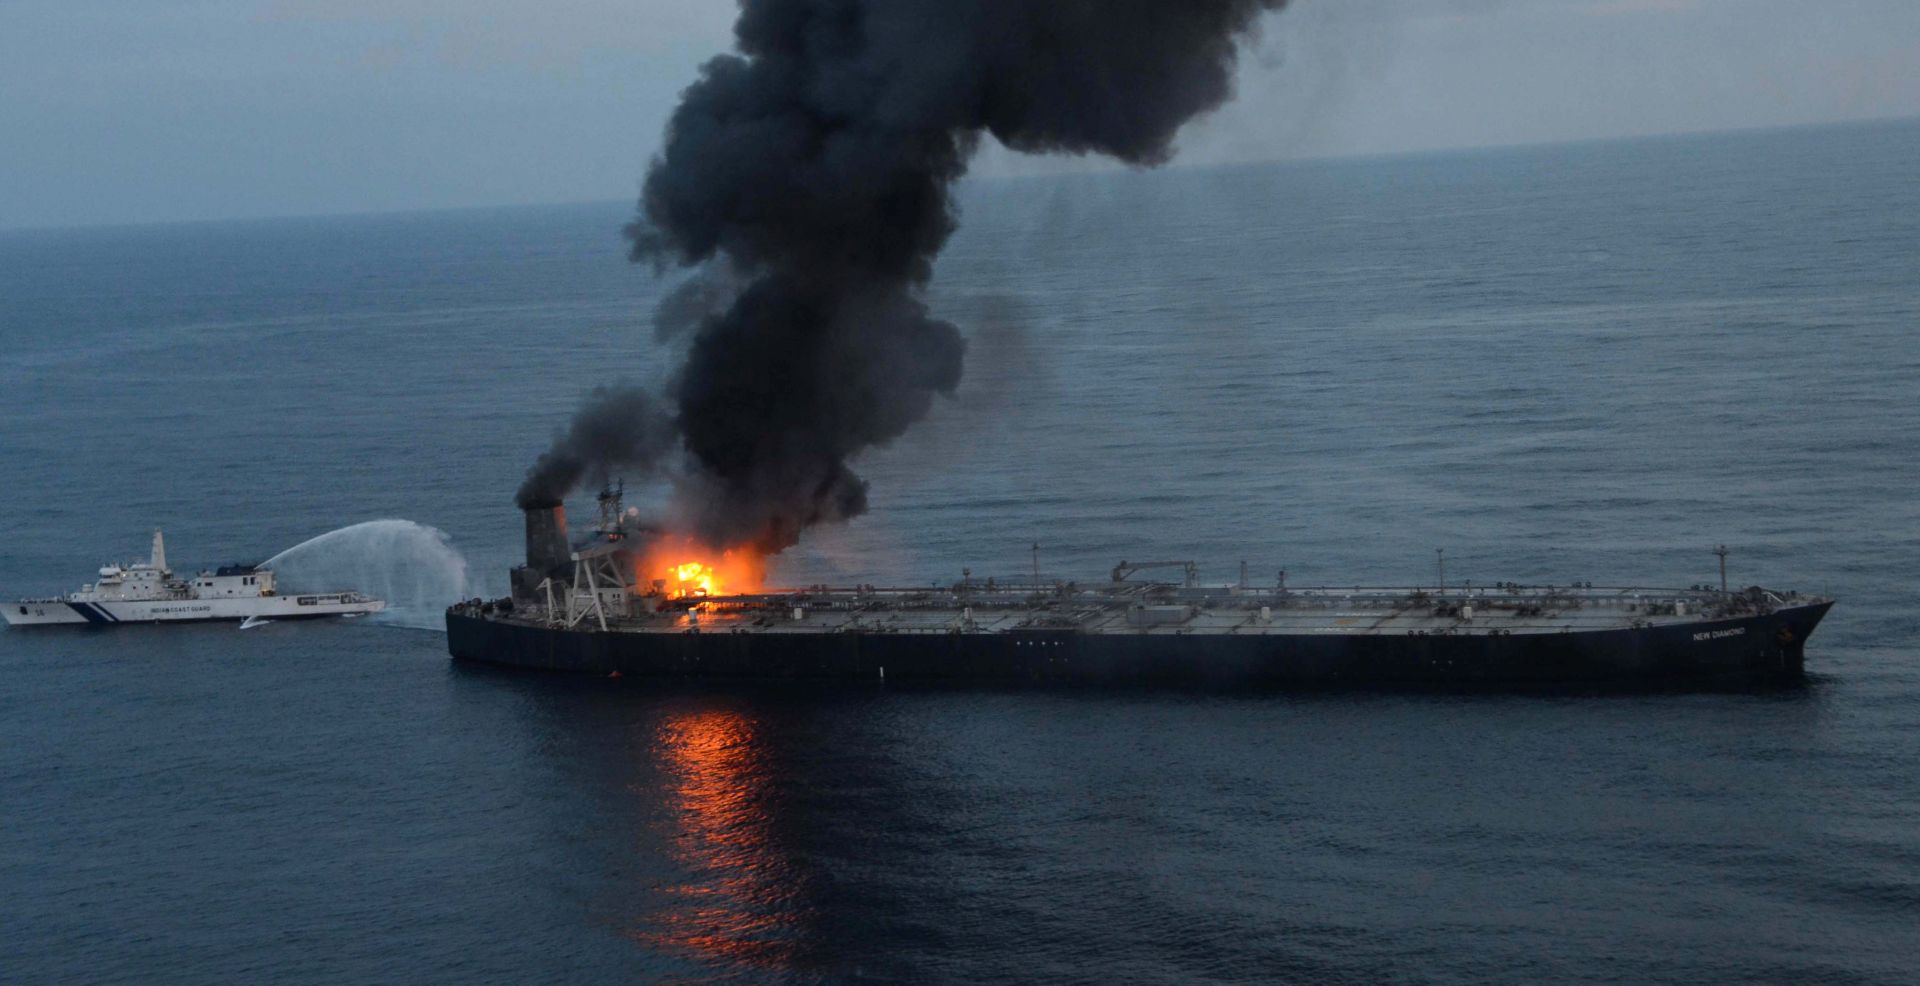 epa08645366 A handout photo made available by the Sri Lankan Air Force Media shows the Panama-flagged crude oil vessel MT New Diamond on fire off the east coast of Sri Lanka, 04 September 2020. The MT New Diamond, which was carrying 270,000 metric tons of crude oil from Kuwait, was on its way to the Indian port of Paradip when it caught fire.  EPA/SRI LANKAN AIR FORCE MEDIA HANDOUT HANDOUT HANDOUT EDITORIAL USE ONLY/NO SALES HANDOUT EDITORIAL USE ONLY/NO SALES